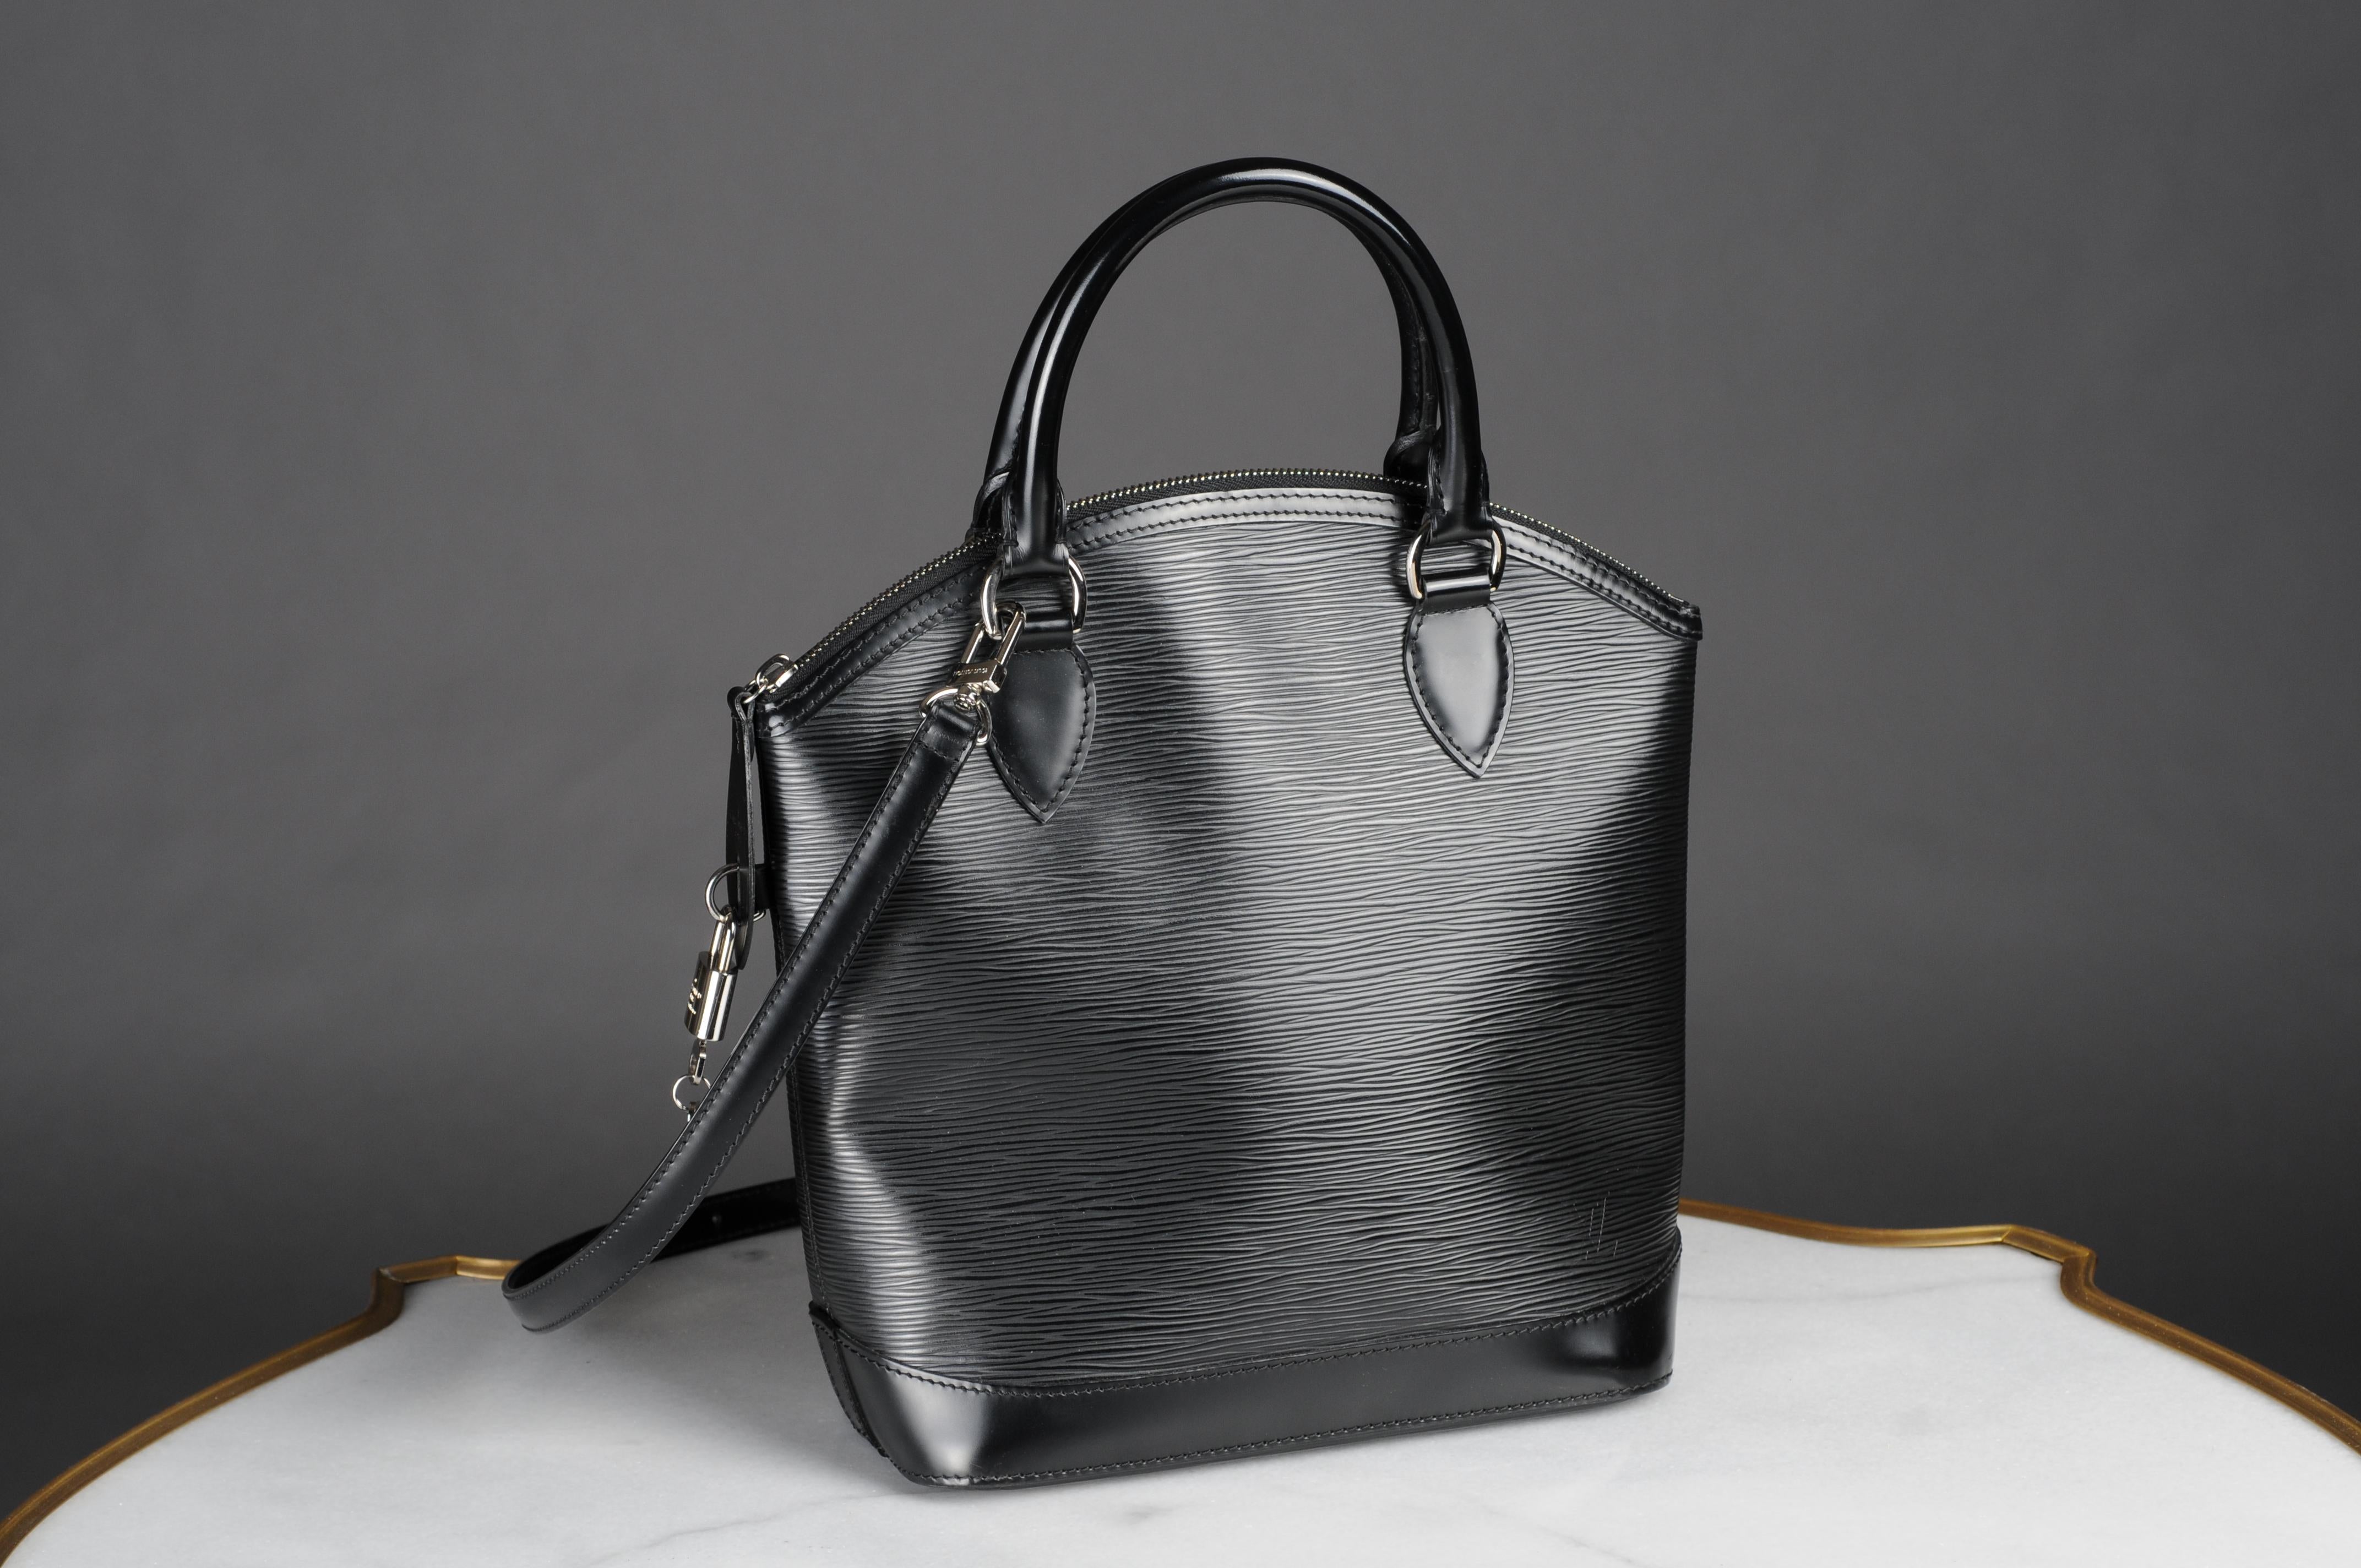 The bag is in good used but always well-maintained condition. The leather is in excellent condition apart from the signs of wear on the handles and the bottom of the bag, see photos.
Perfect condition 